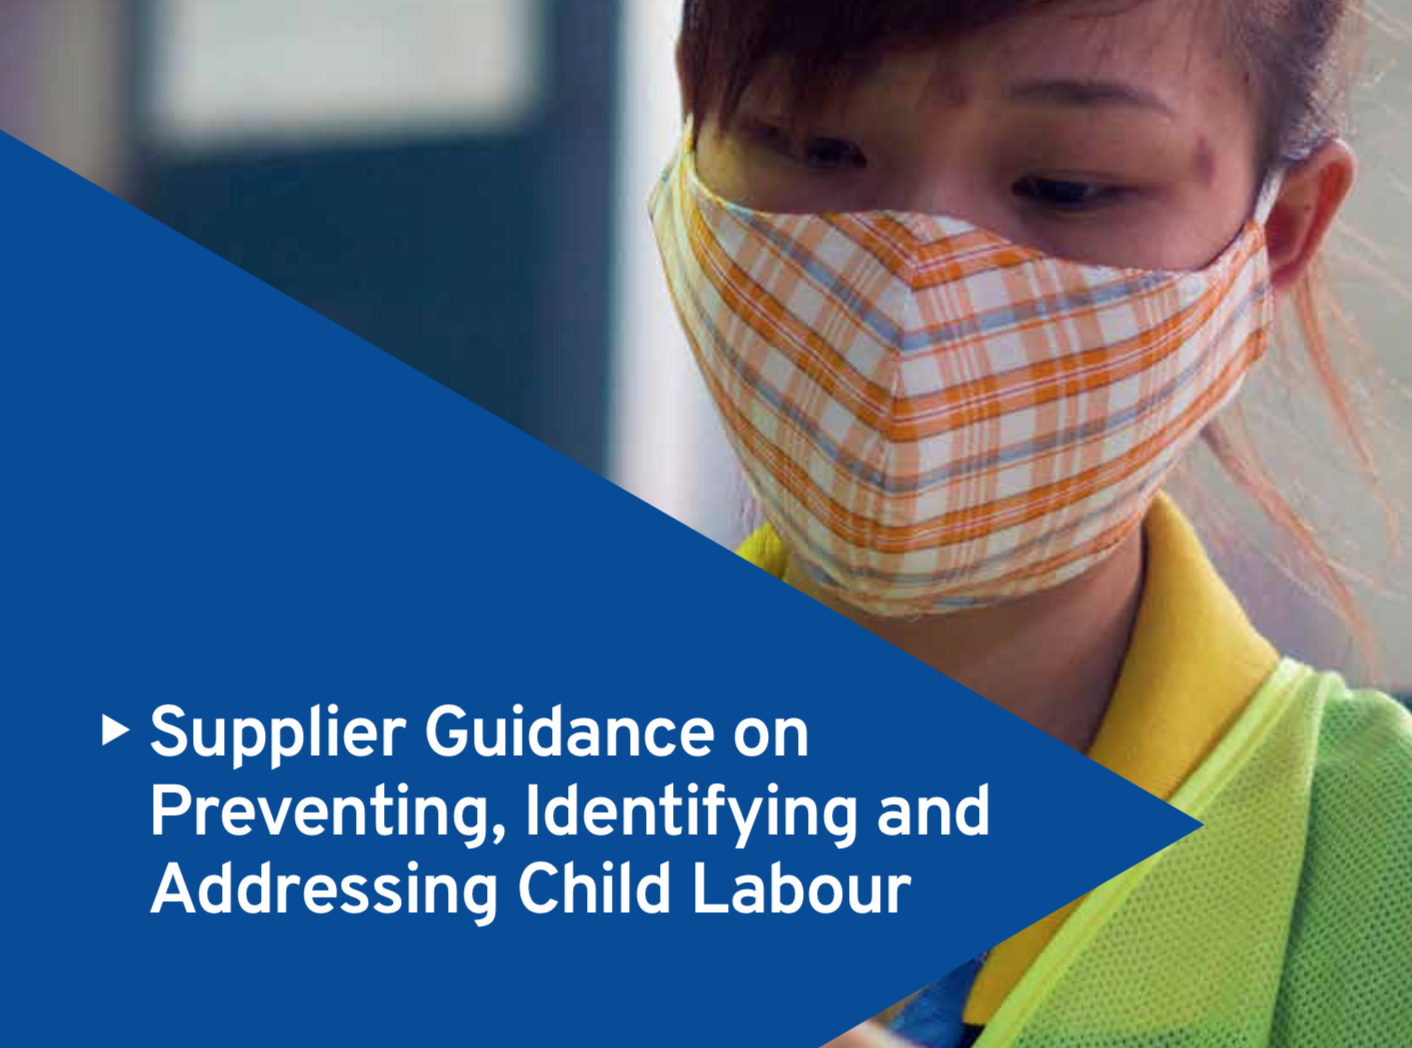 ILO Publishes 'Supplier Guidance on Preventing, Identifying and Addressing Child Labour'